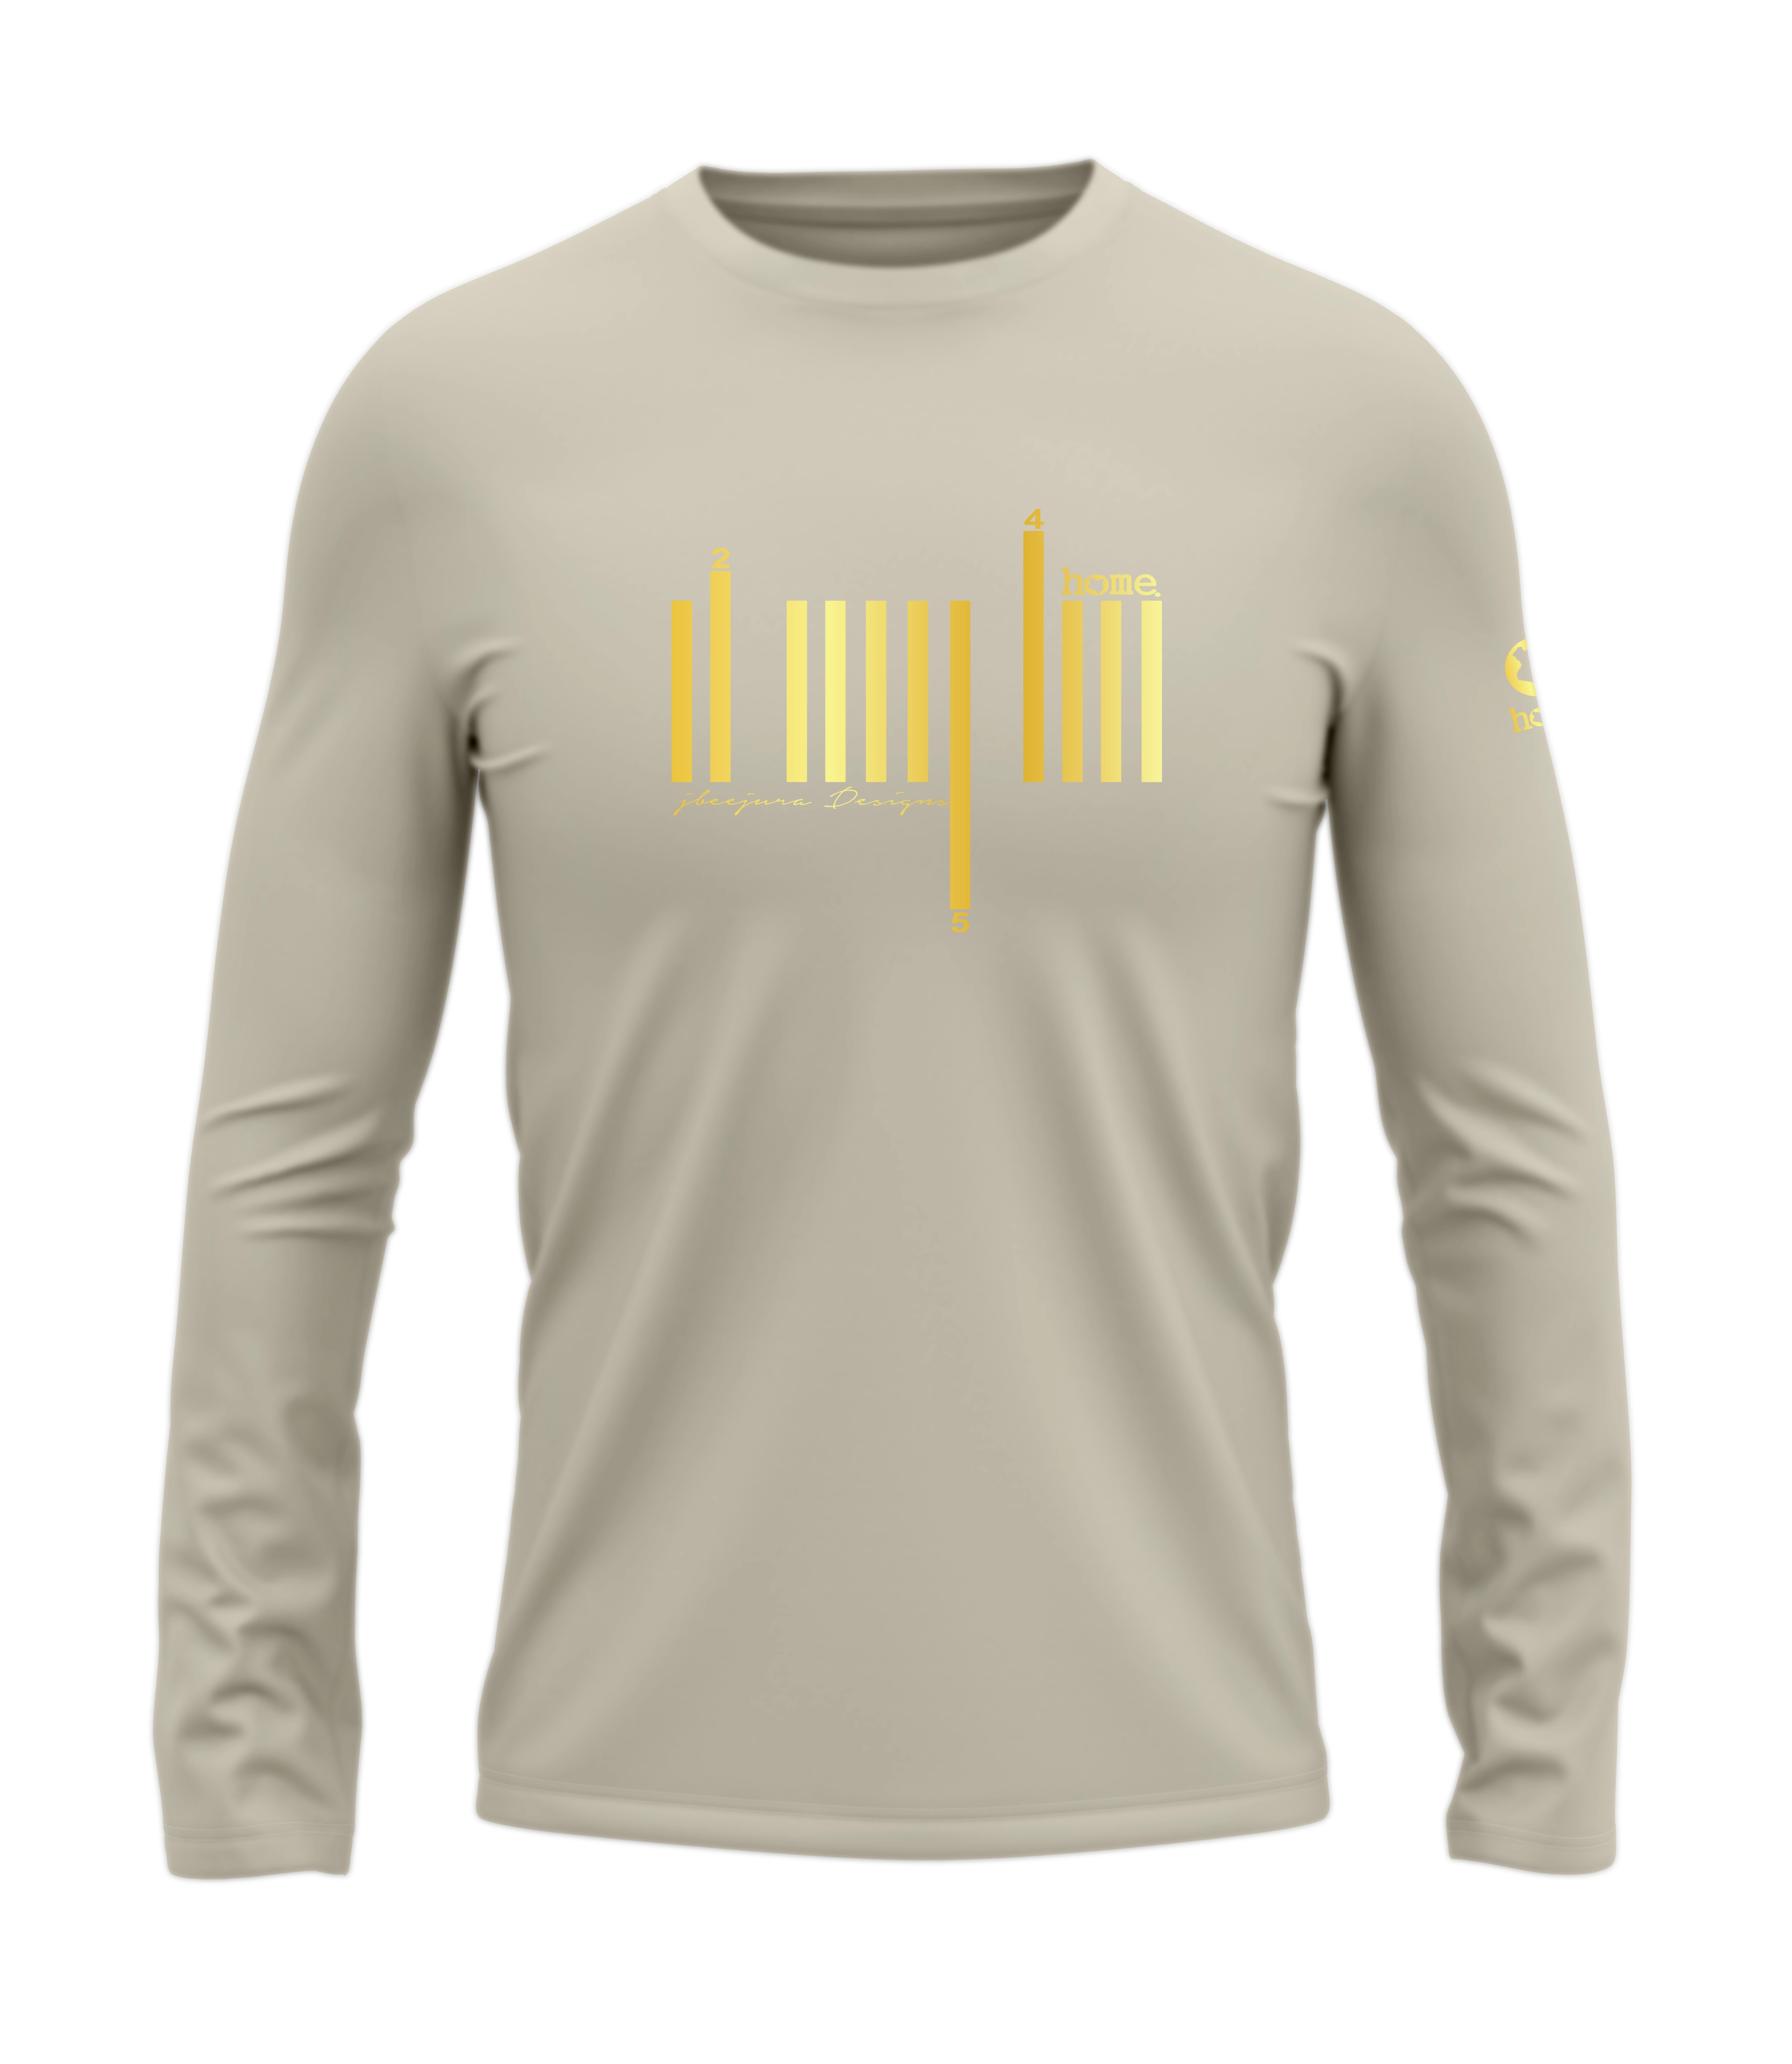 home_254 LONG-SLEEVED NUDE T-SHIRT WITH A GOLD BARS PRINT – COTTON PLUS FABRIC